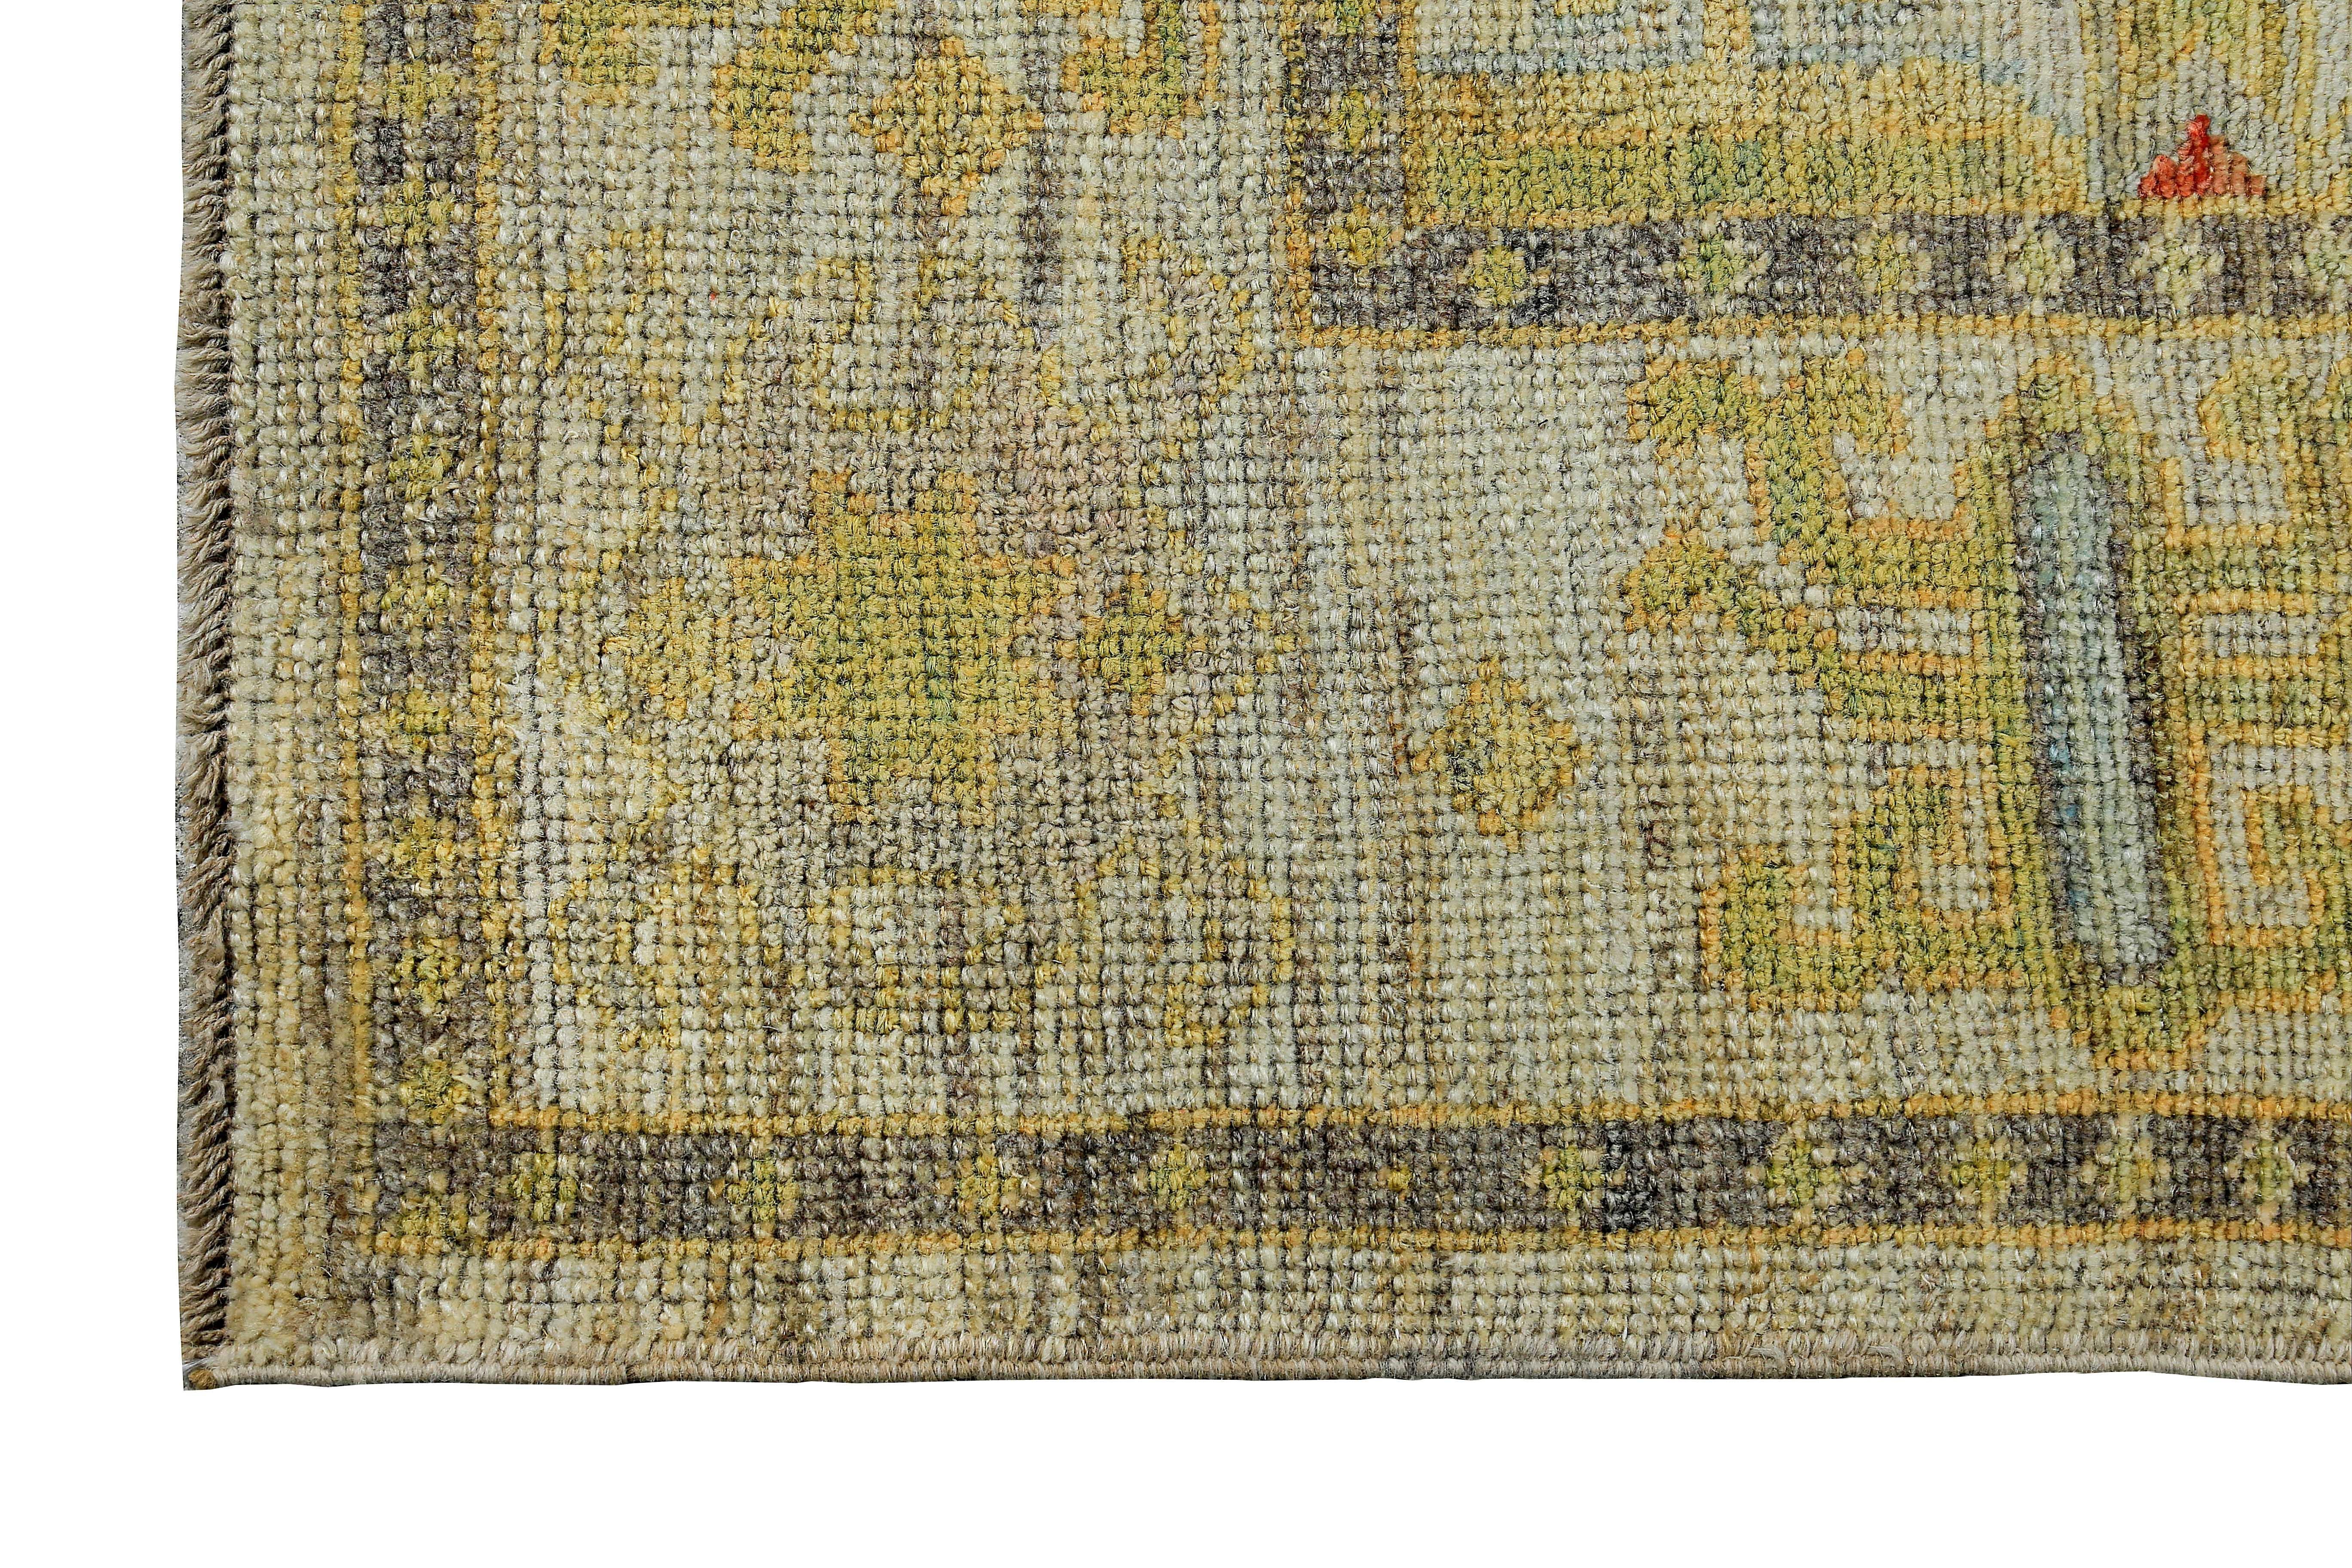 Hand-Woven Turkish Oushak Rug with Gold and Gray Floral Medallions on Ivory Field